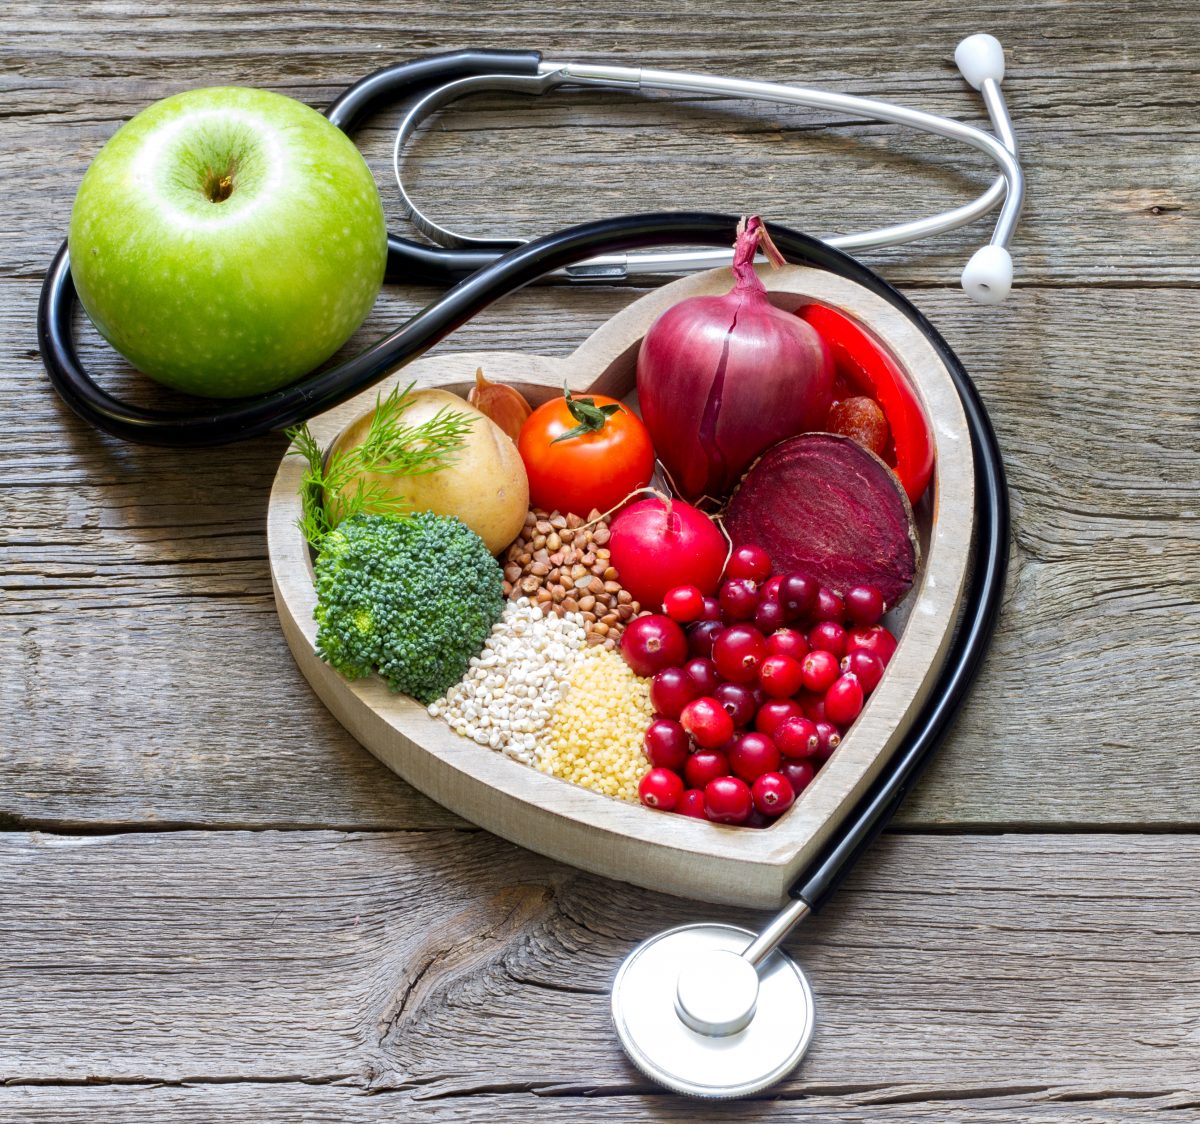 8 Ways to Lower Your Risk of Heart Disease